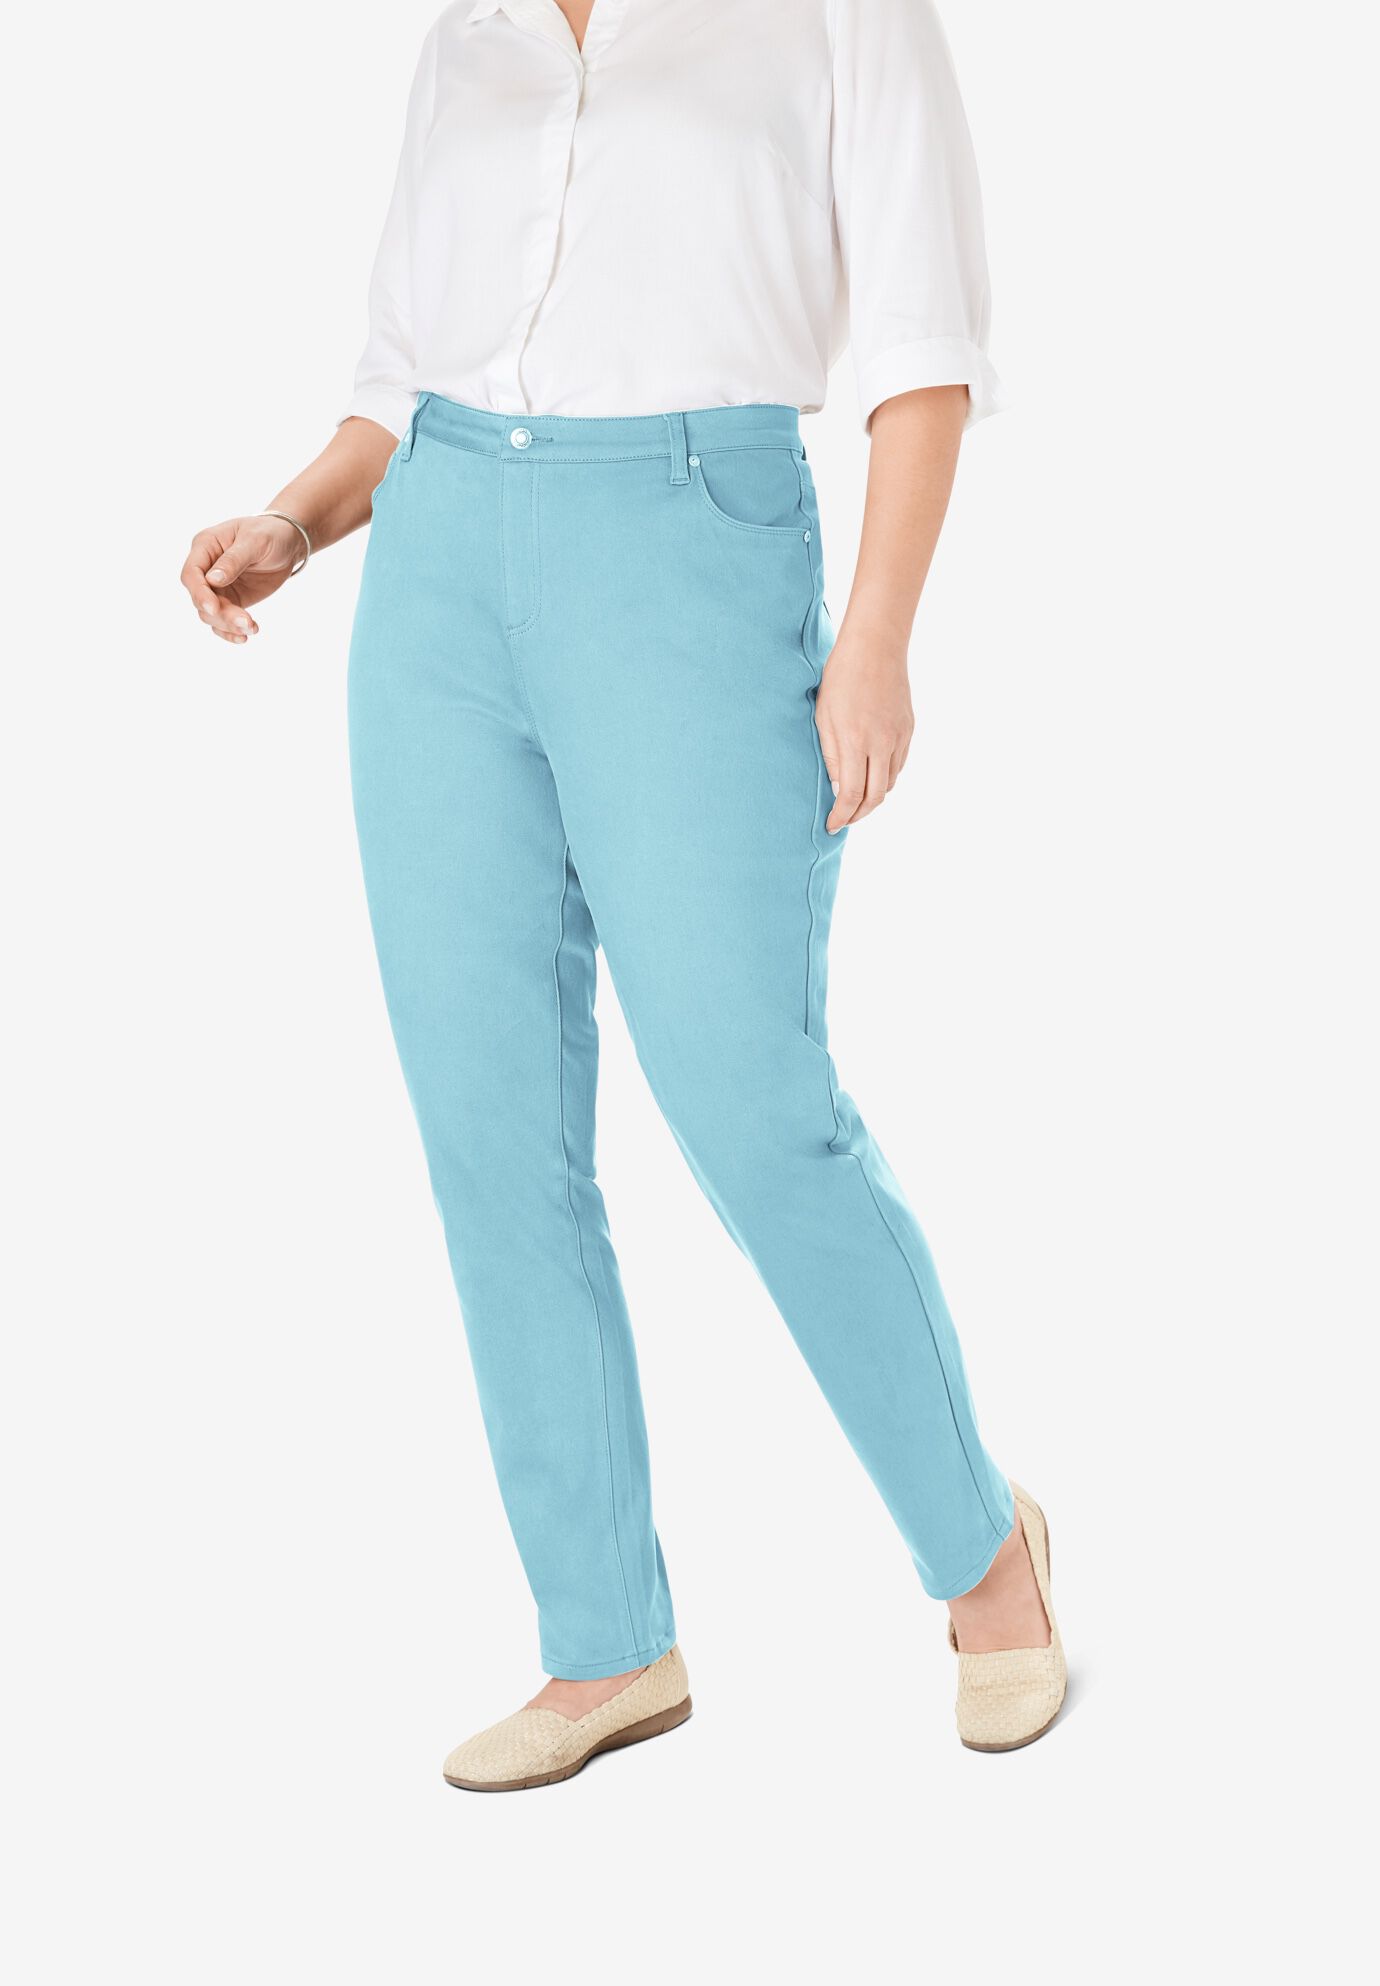 clearance plus size jeans